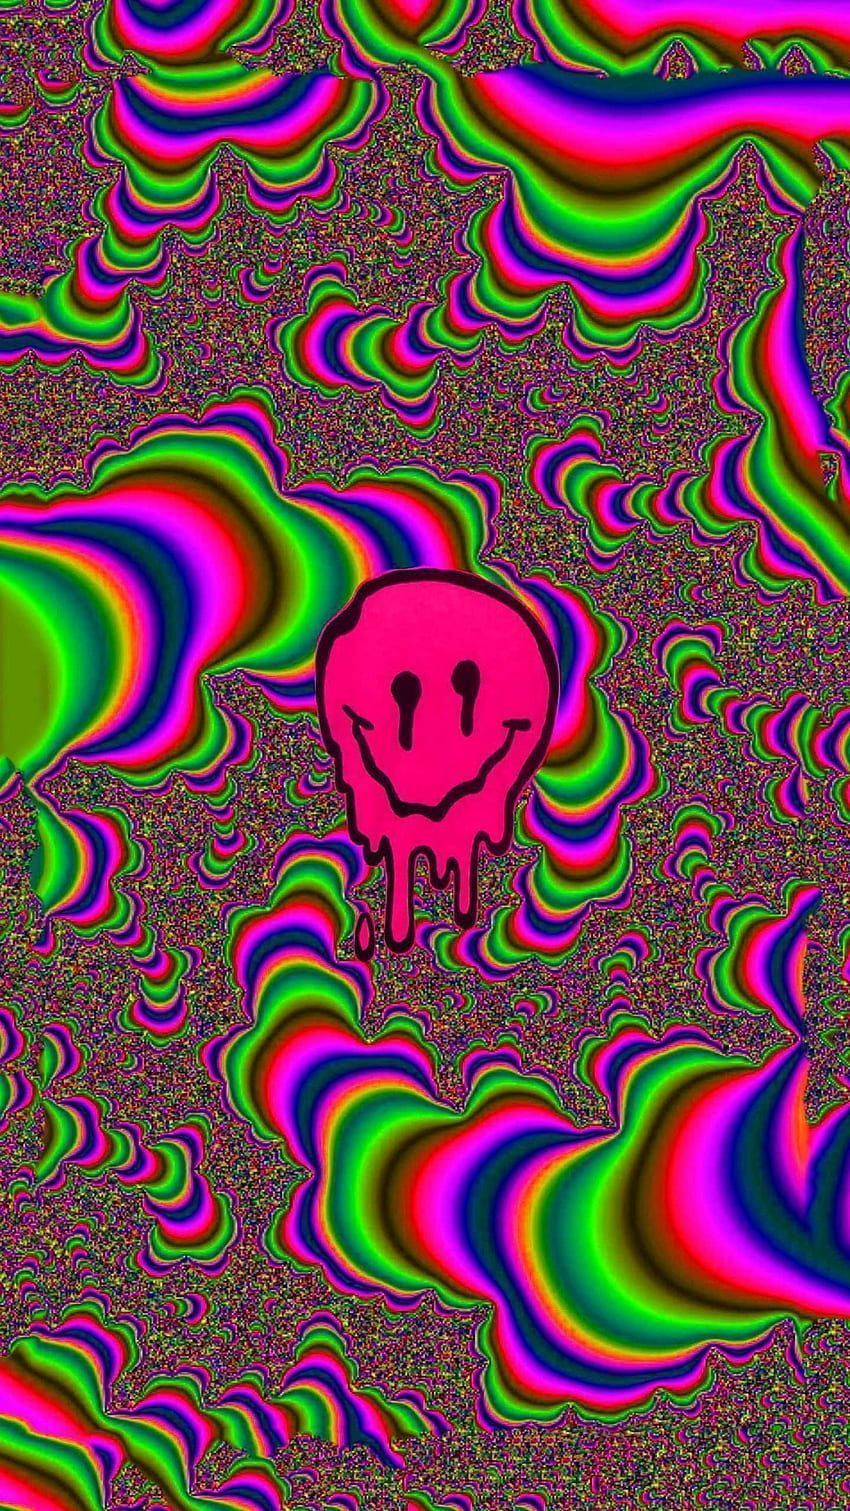 A neon pink smiley face with a keyhole for a nose is surrounded by a background of green, pink, and purple swirled lines. - Internetcore